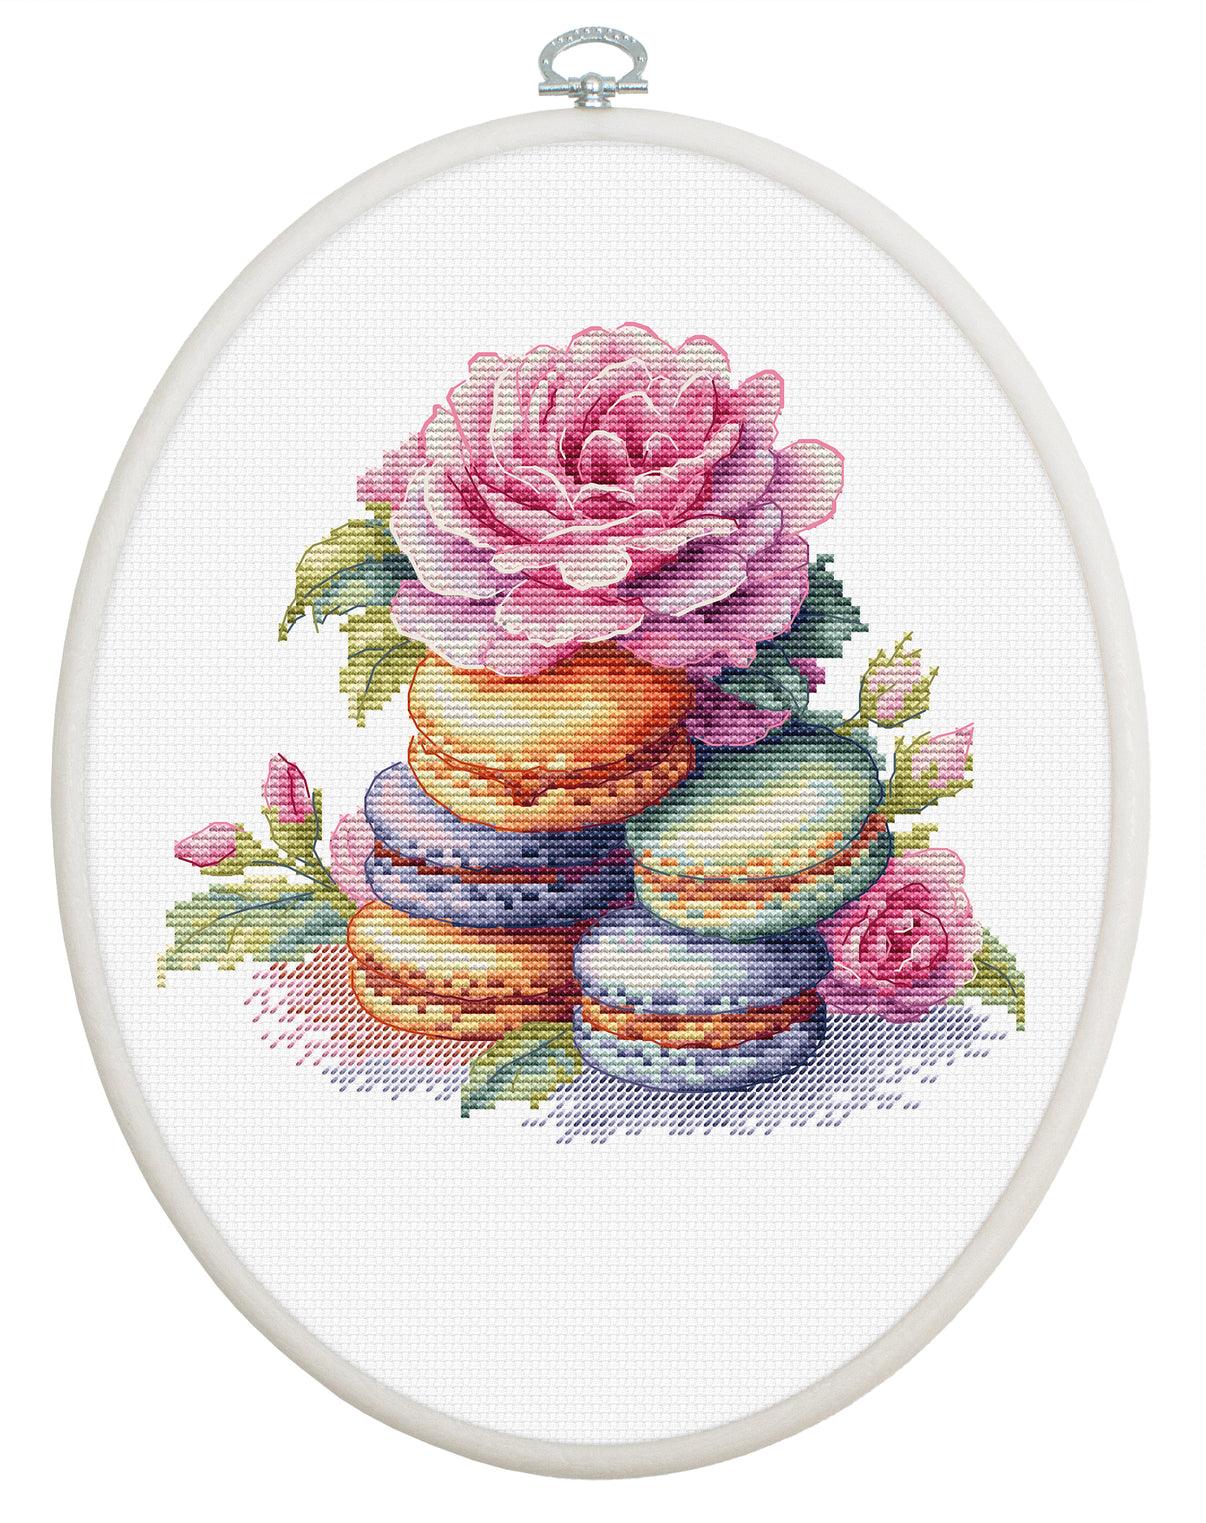 DUTCH STITCH BROTHERS - Rose Counted Cross Stitch 4 Hoop and Pattern  Included - Cross Stitching Kits for Adults Advanced and Beginners